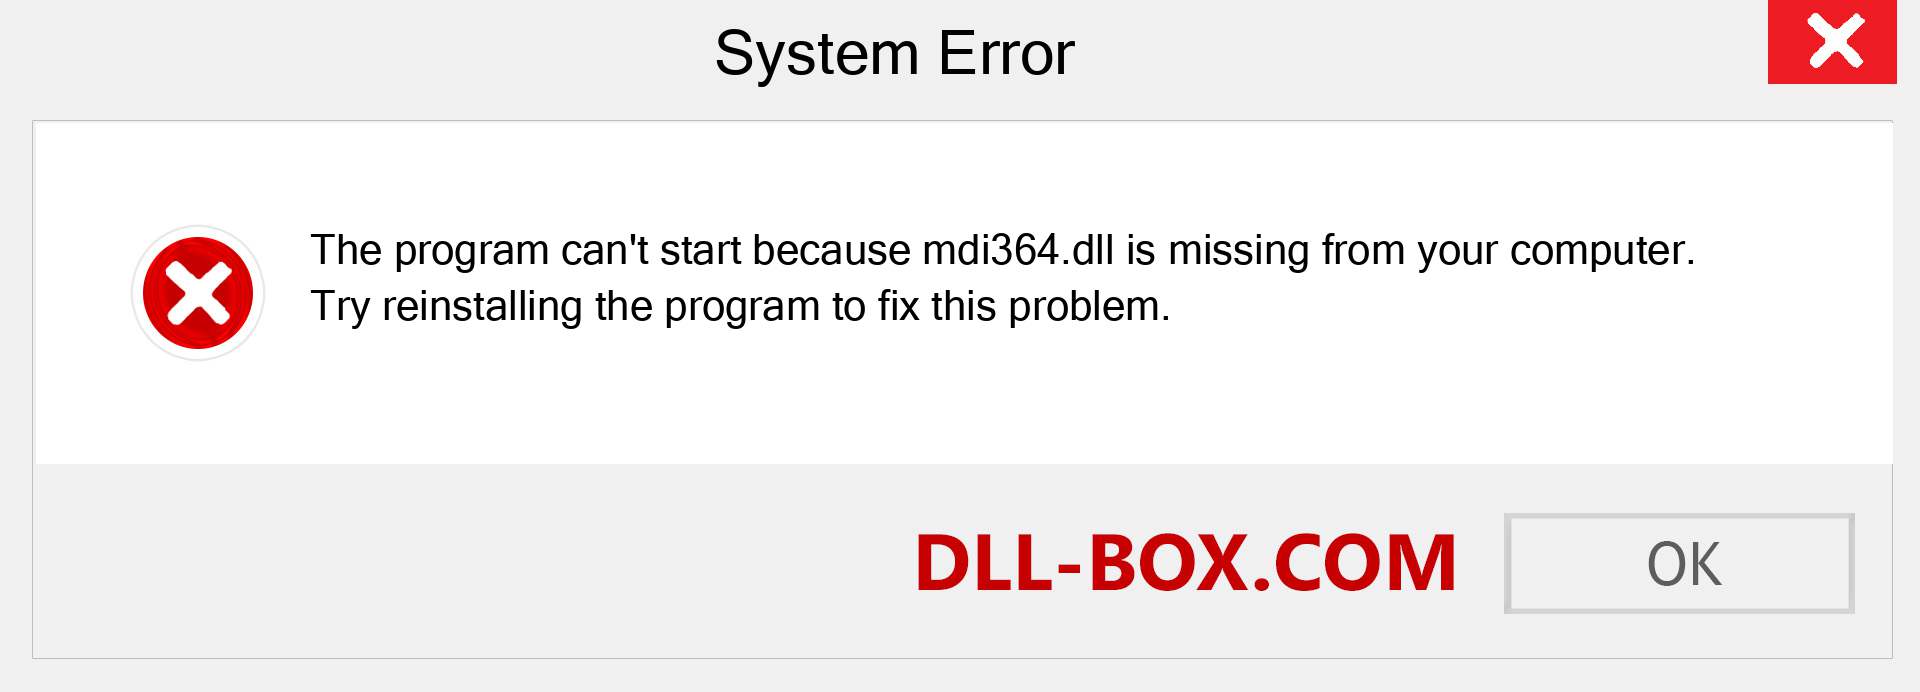  mdi364.dll file is missing?. Download for Windows 7, 8, 10 - Fix  mdi364 dll Missing Error on Windows, photos, images